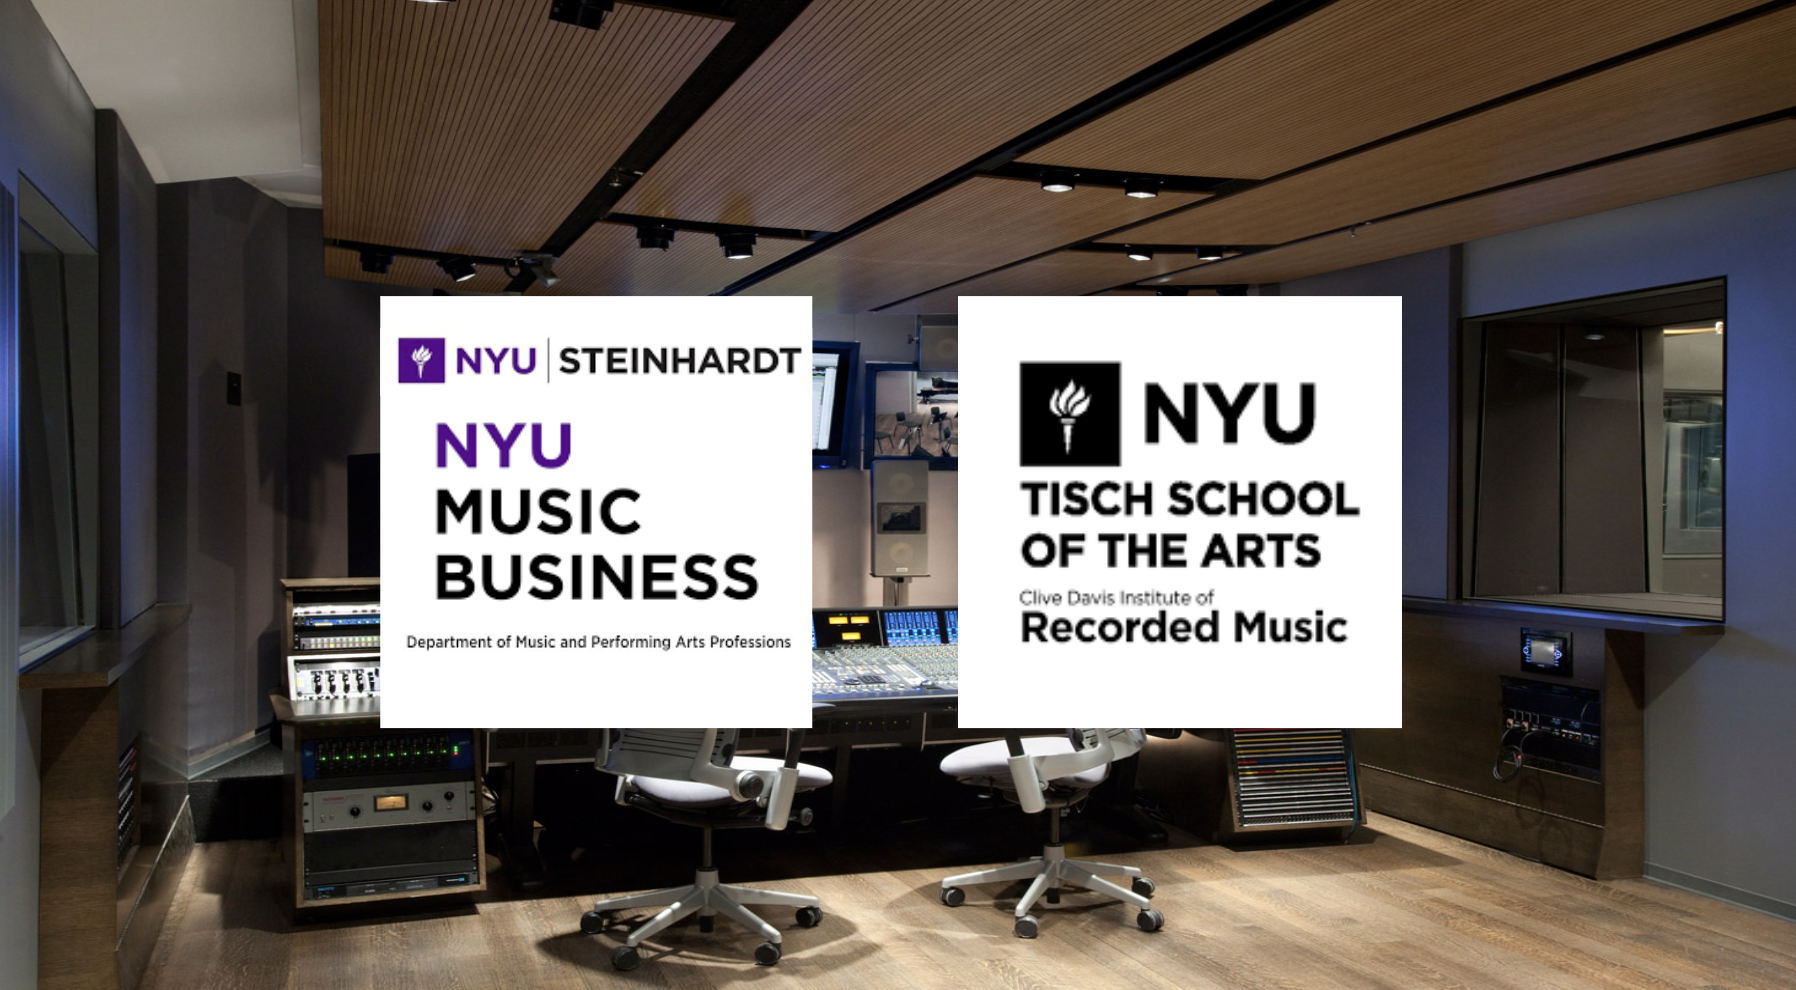 Collage of a recording studio and two boxes with the information of two NYU programs: Music Business at NYU Steinhardt and Recorded Music at NYU Tisch.